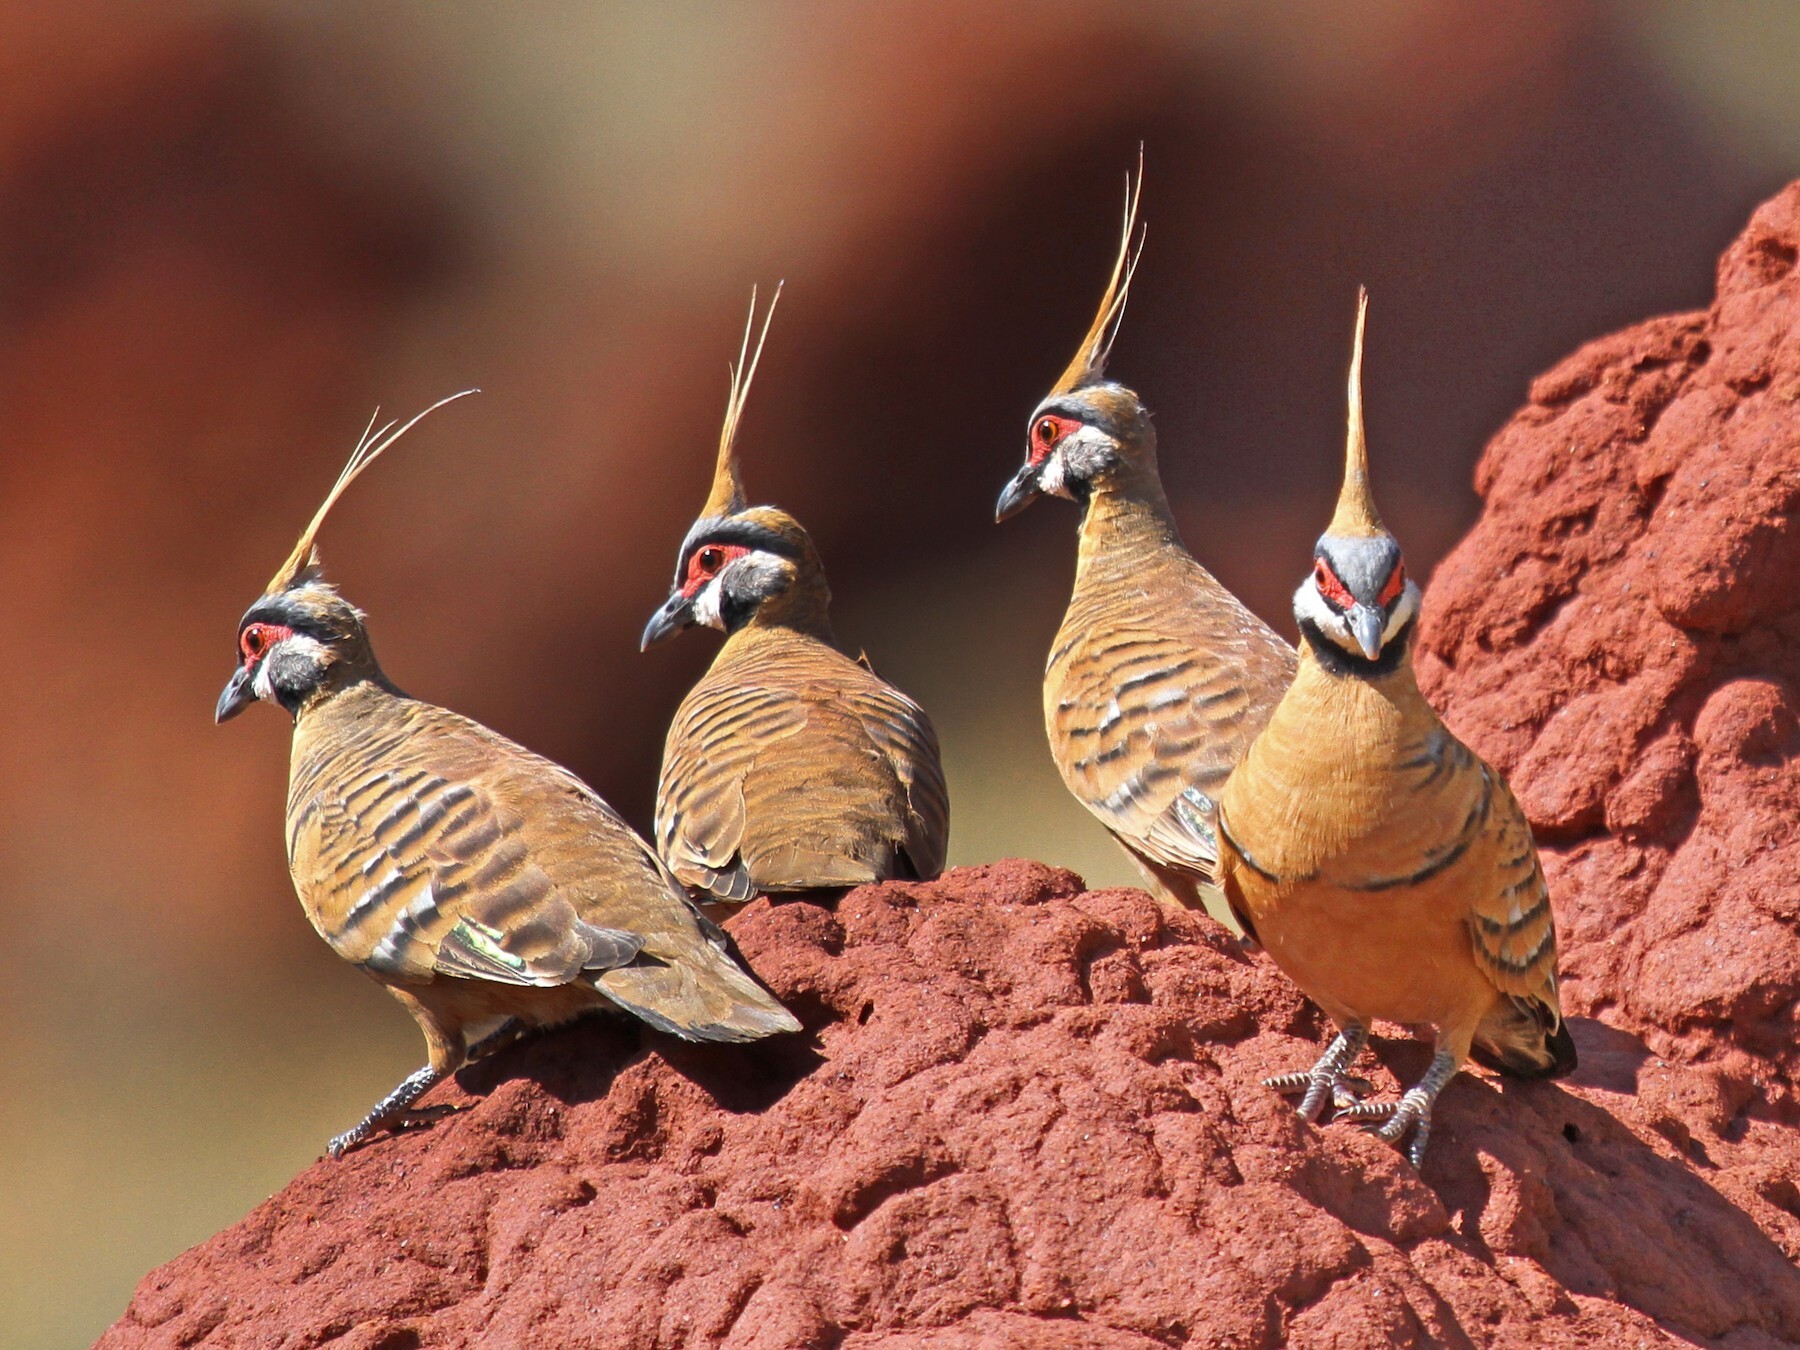 Four Spinifex Pigeon perching at the red colored stone with tiny black bars on their wings and back while its bill is black and its head has spikey feathers.